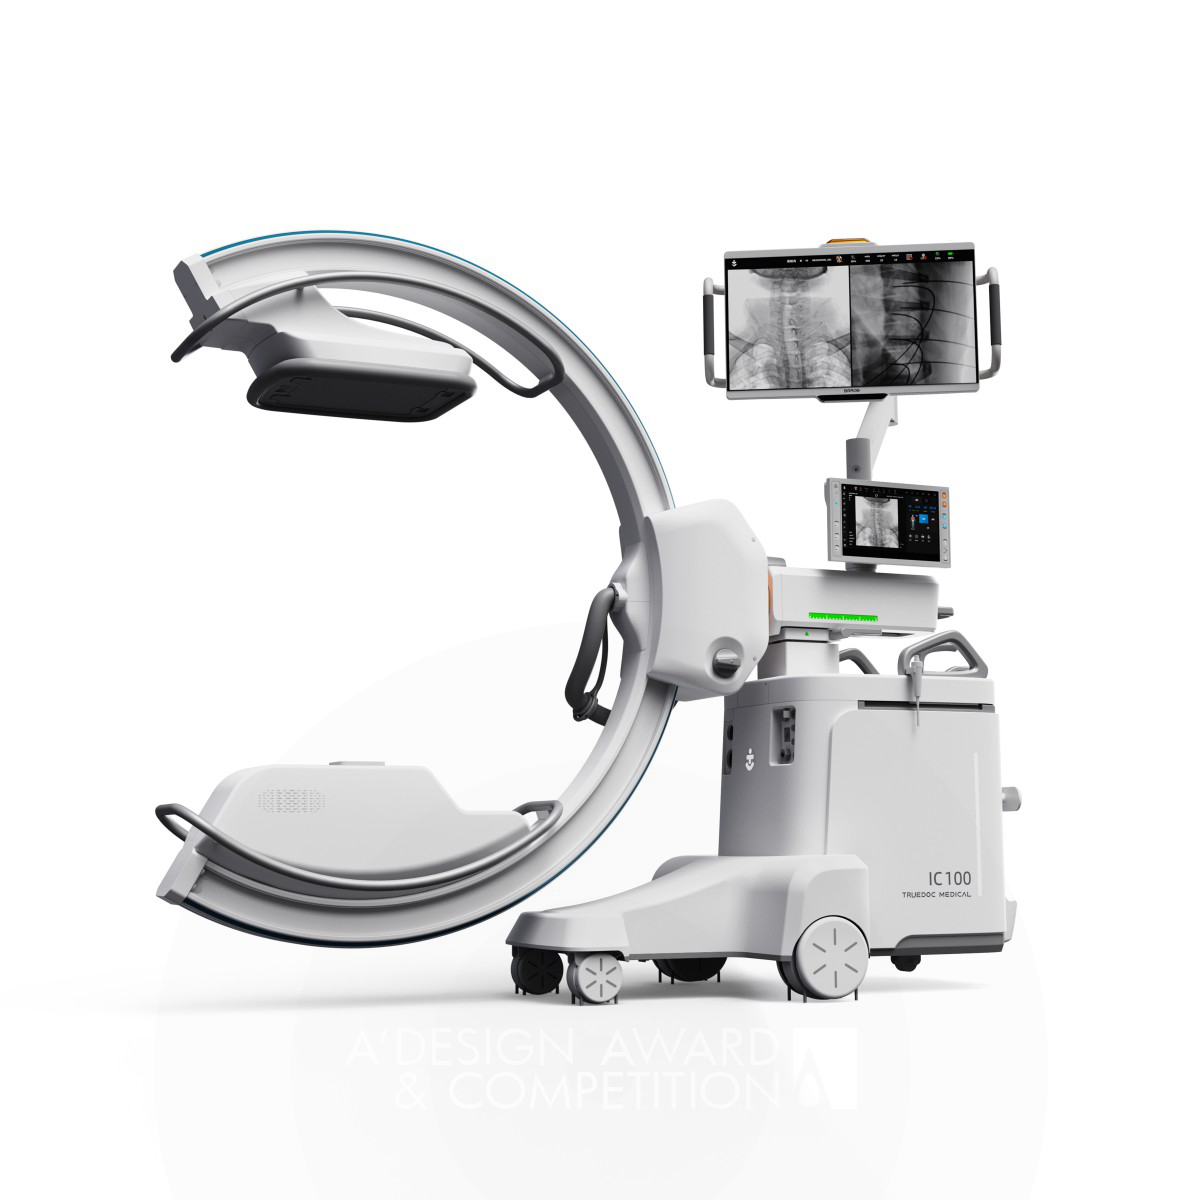 Xuan Teng wins Silver at the prestigious A' Medical Devices and Medical Equipment Design Award with IC100 Mobile 3D X-ray Fluoroscope Medical Device.